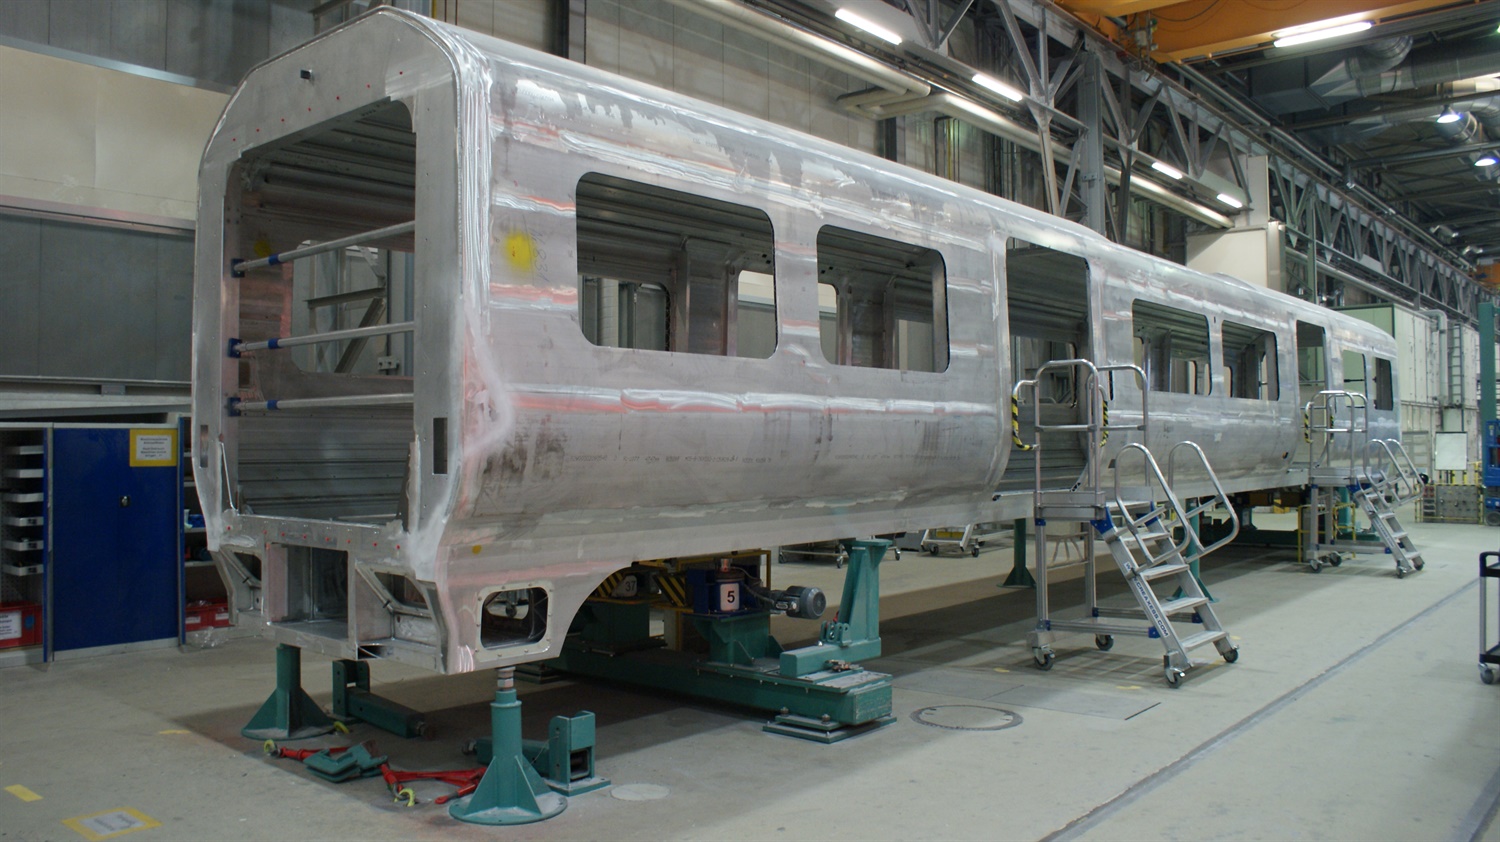 Siemens finishes building first Class 707 bodyshell for South West Trains